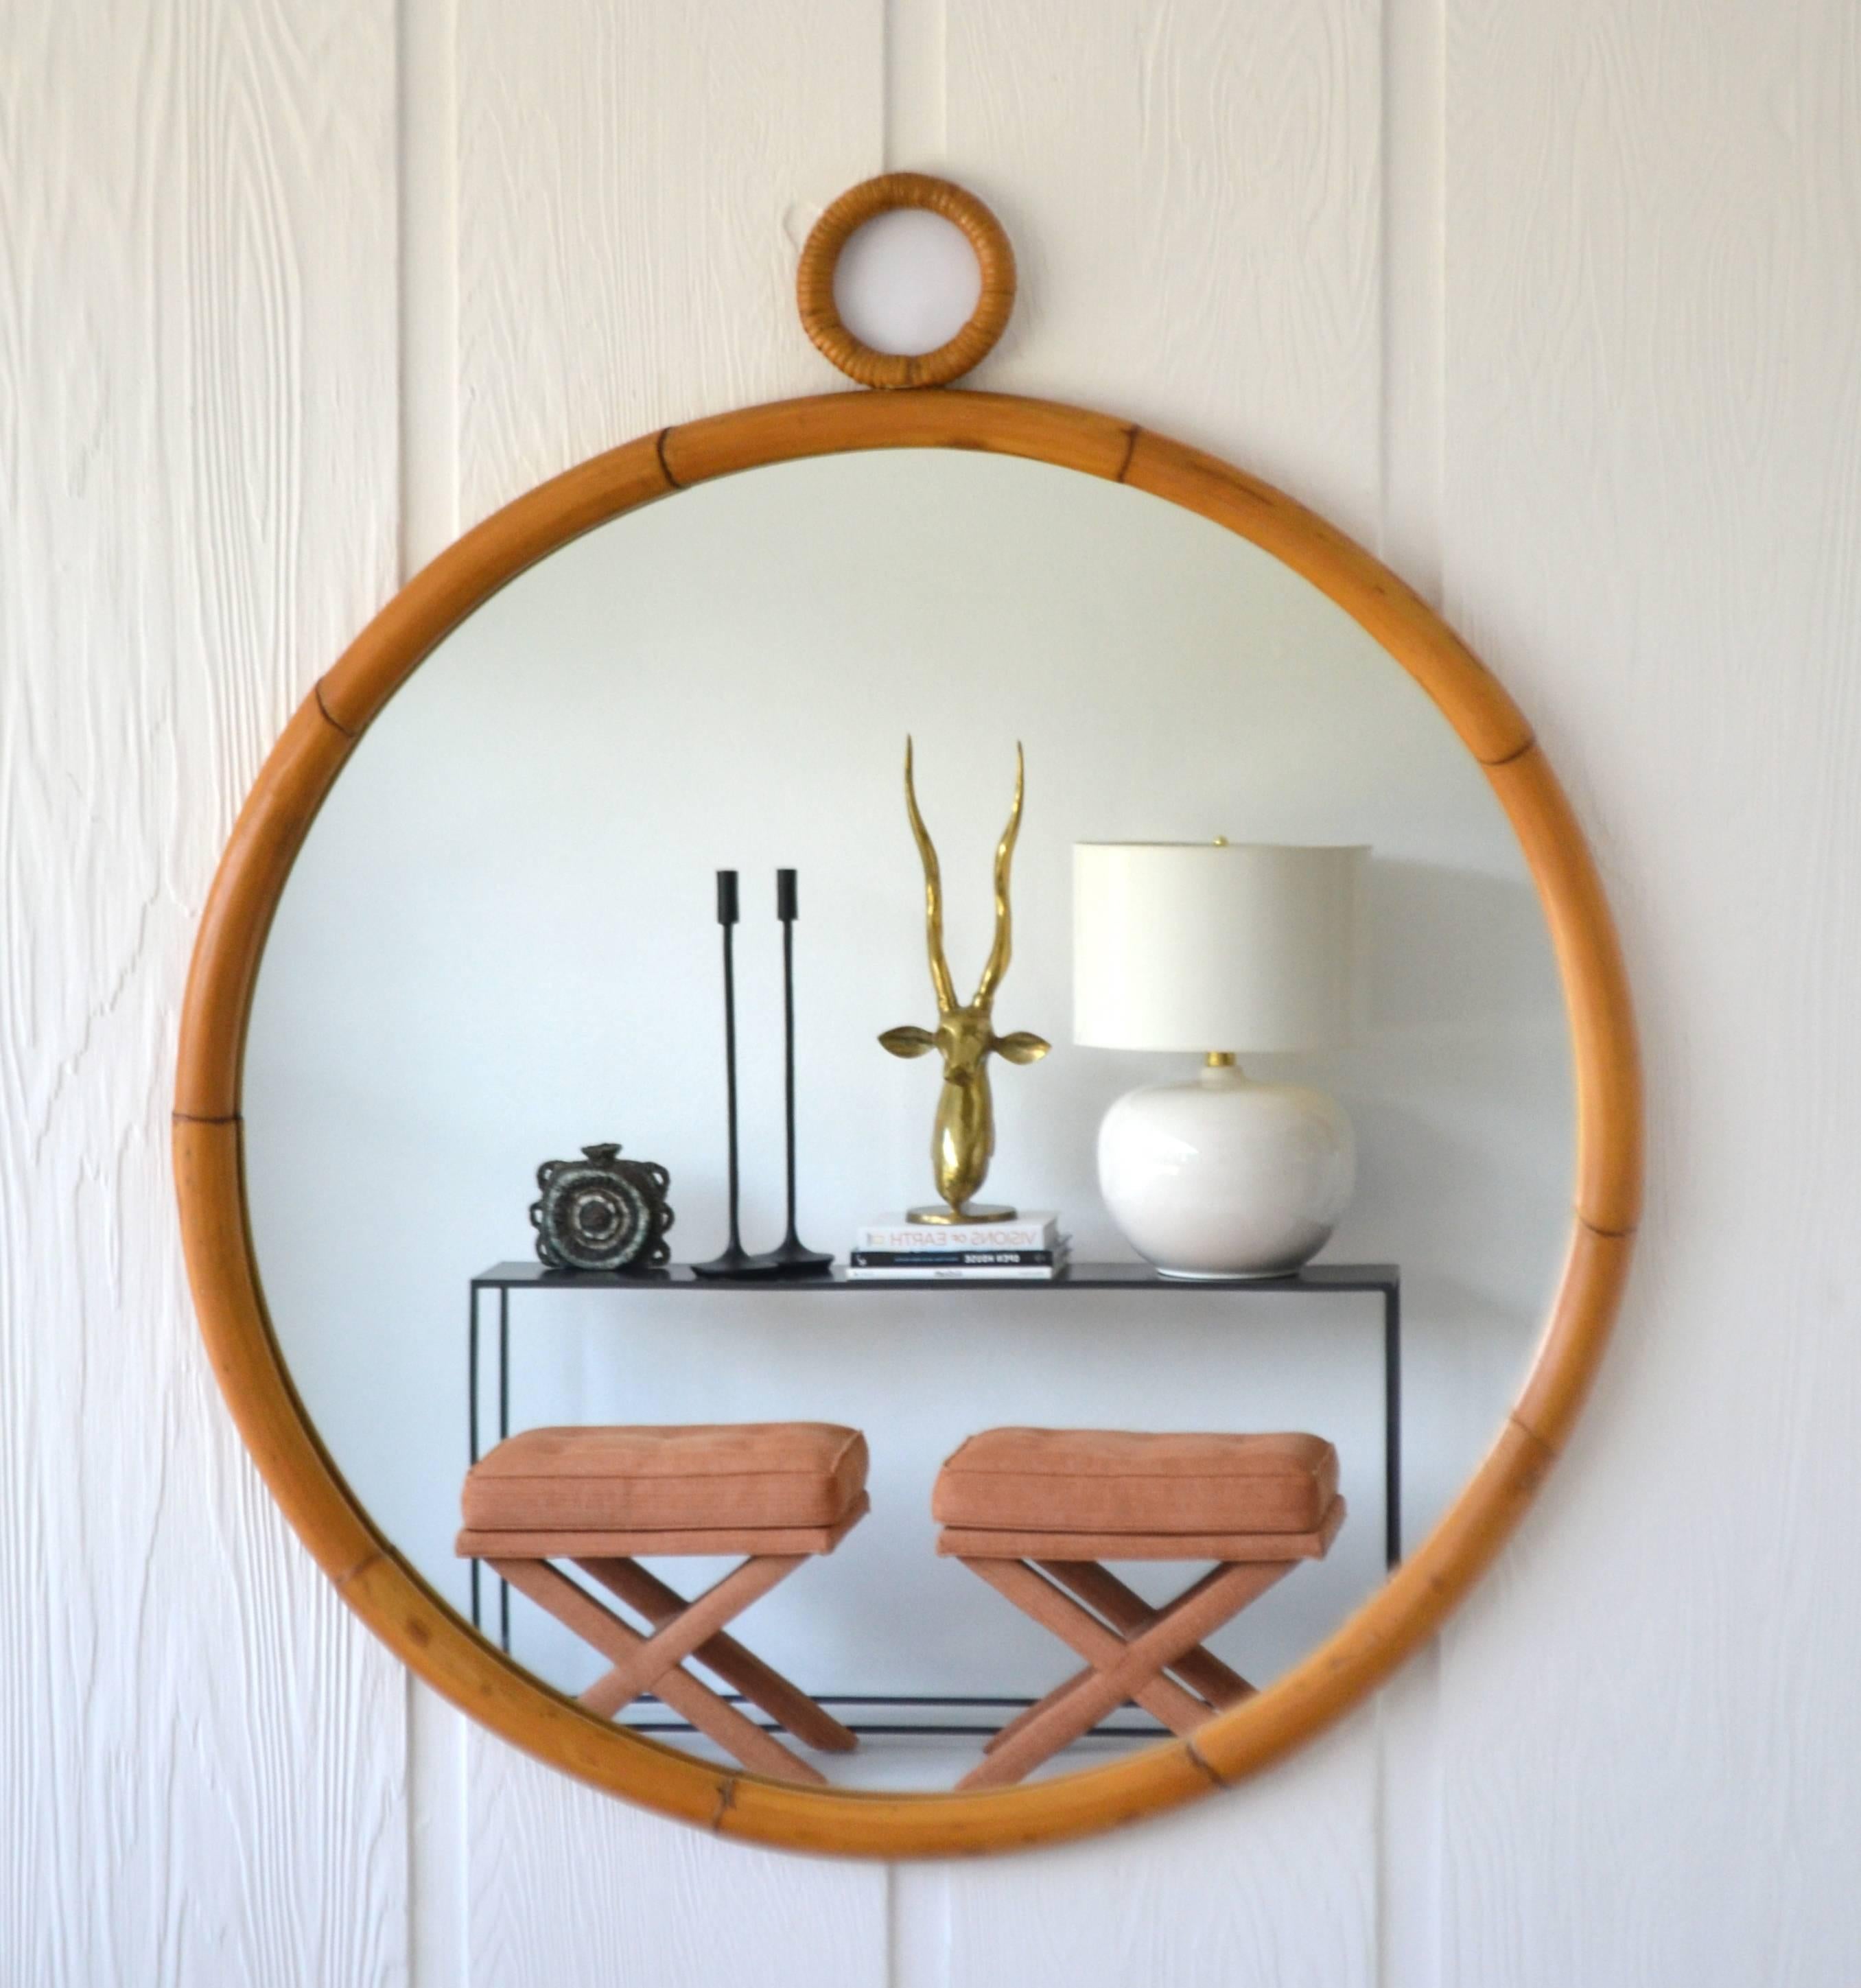 Glamorous Mid-Century bamboo wall mirror, circa 1960s-1970s. This stunning round Jacquqes Adnet / Gabriella Crespi inspired mirror is designed of bent bamboo and accented with wrapped rattan detail. Original excellent condition with a warm aged